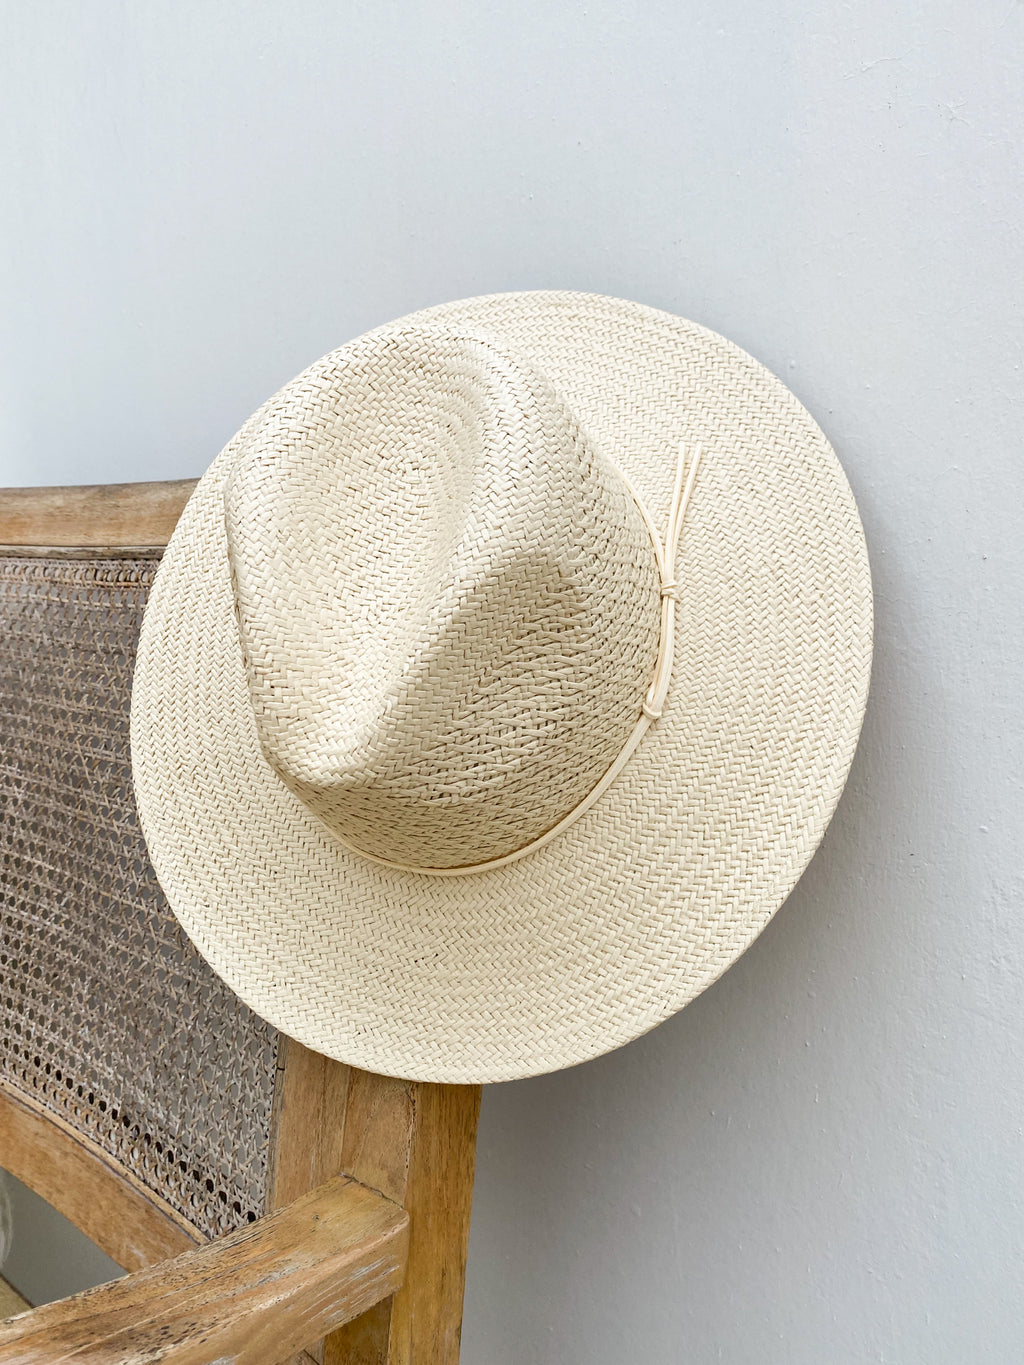 The Clay Straw Fedora – Stitch And Feather